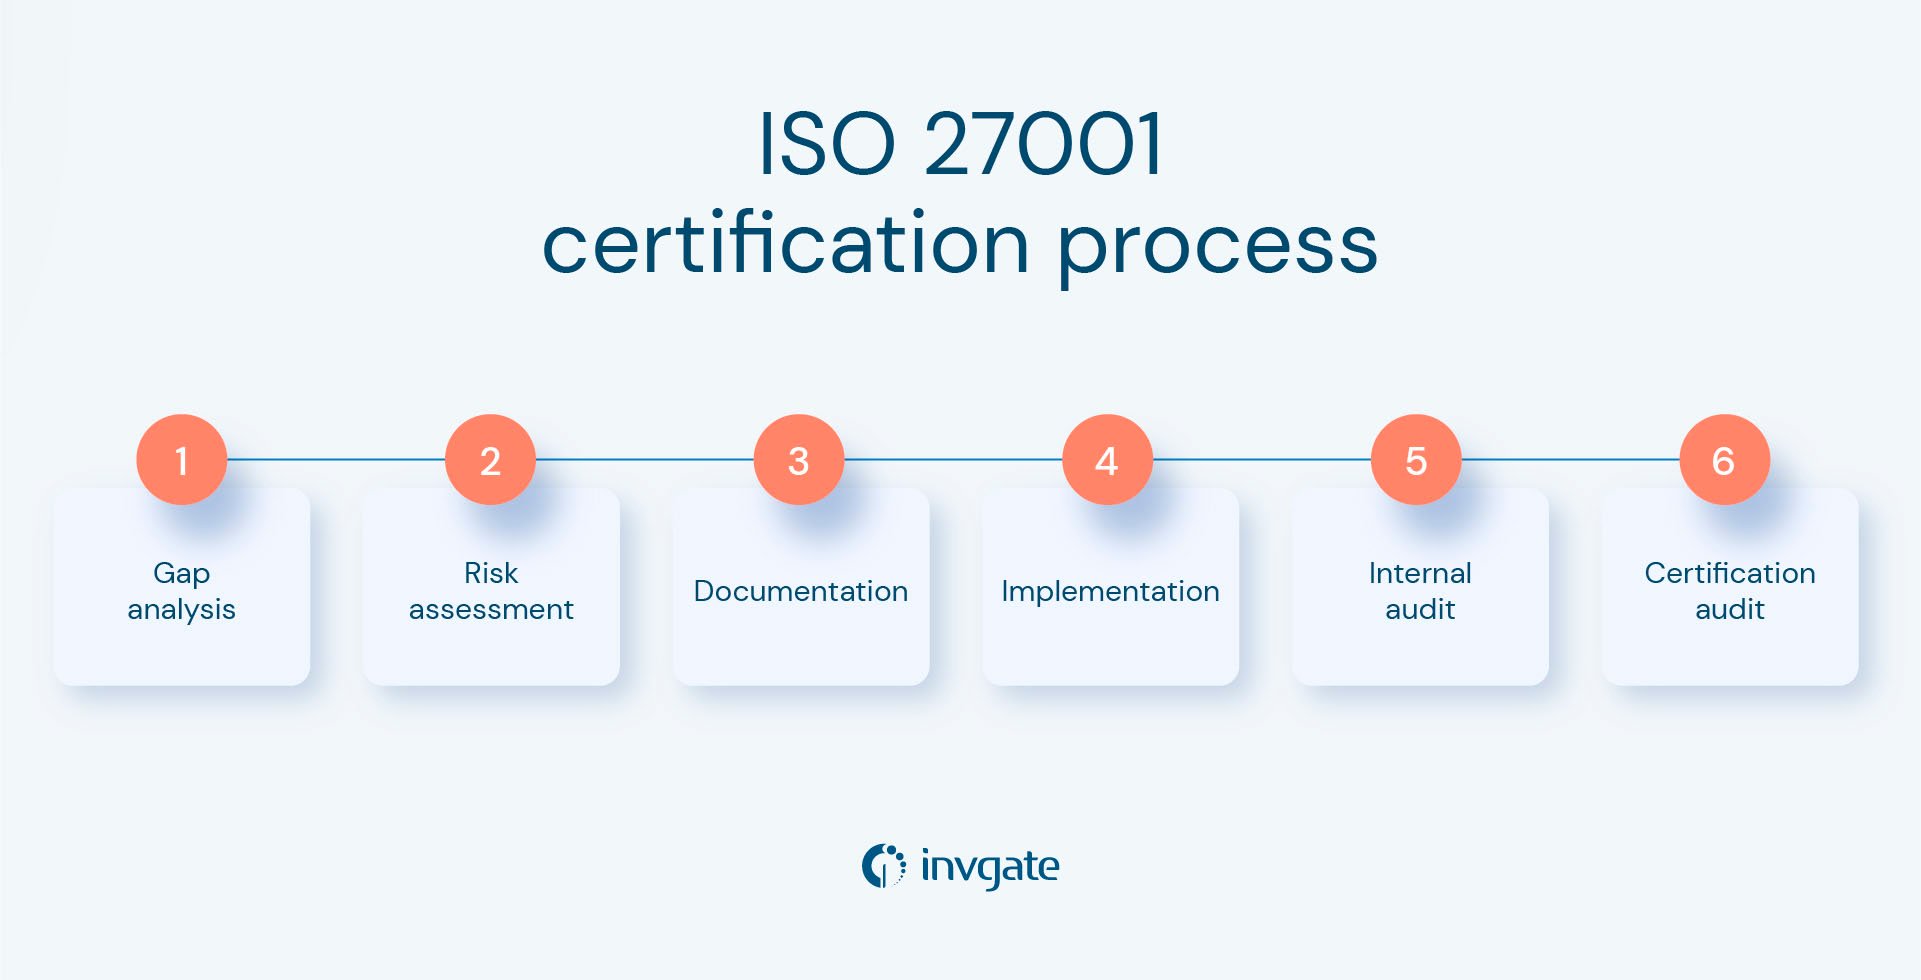 The six stages of the ISO 27001 certification process.